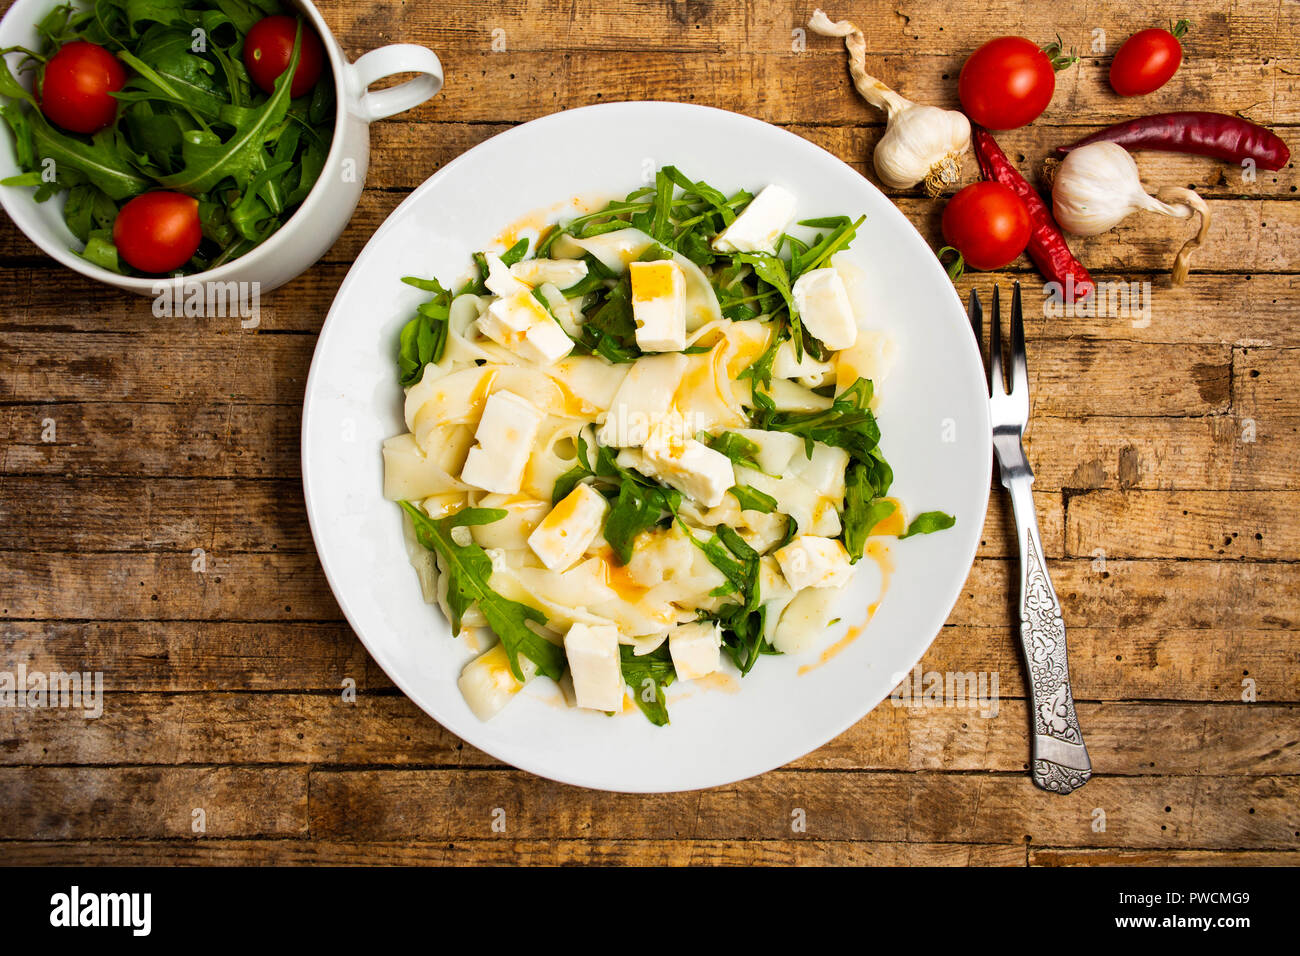 Homemade pasta with arugula served on a plate Stock Photo